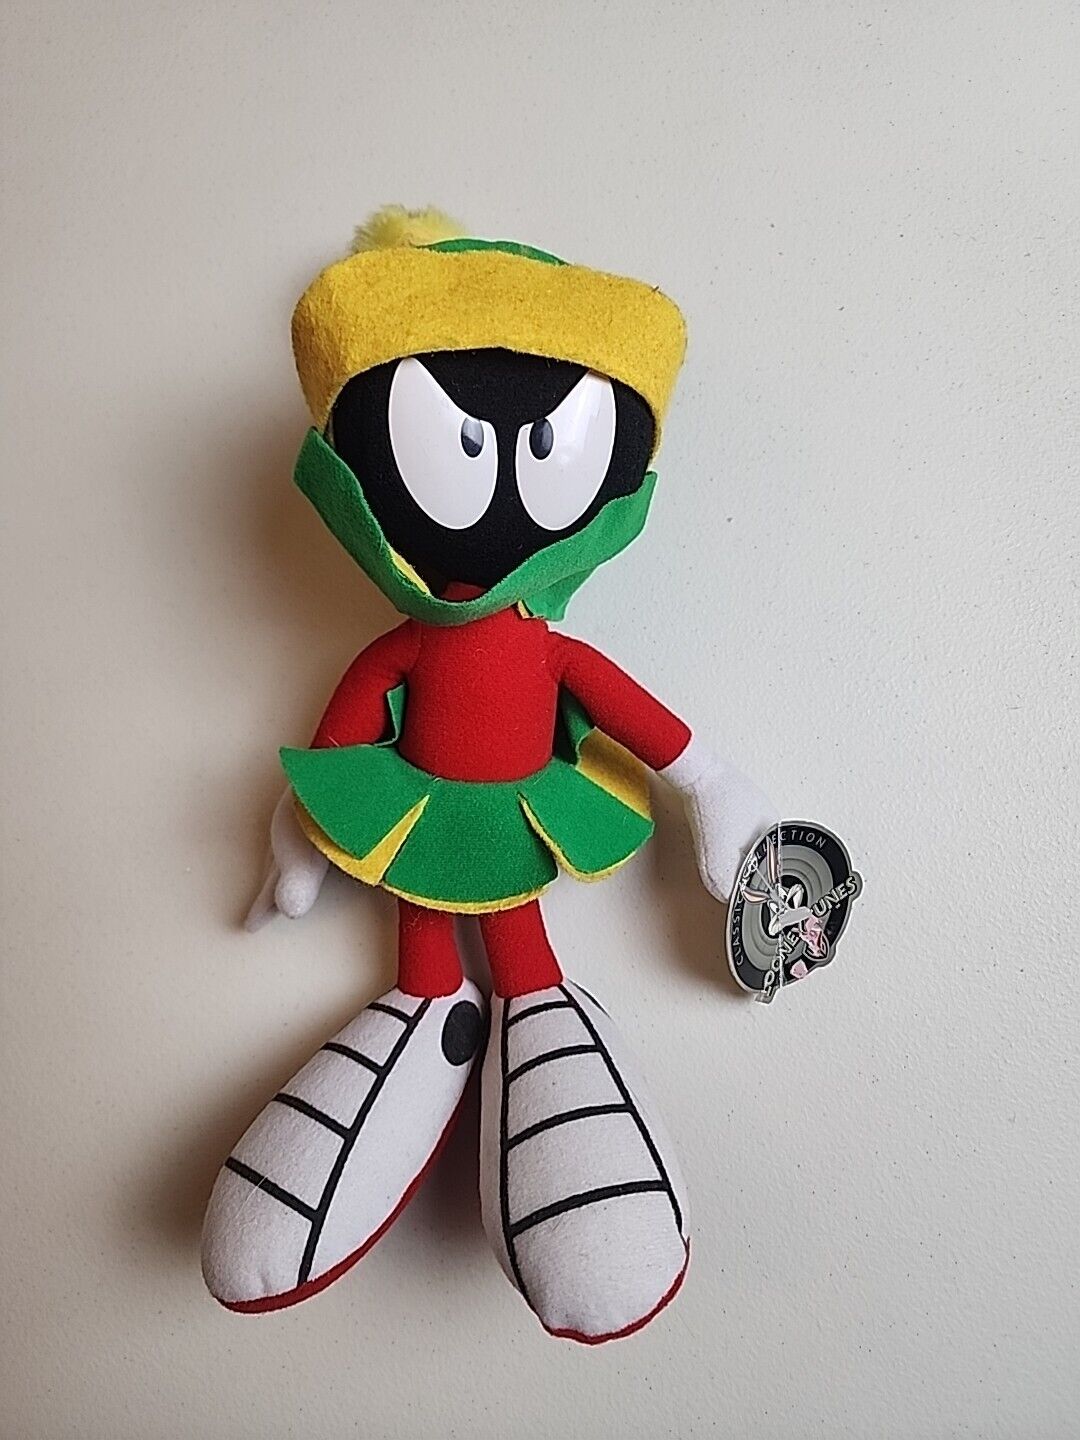 1994 Marvin the Martian Plush Stuffed Doll 13” Warner Bros Looney Tunes Applause